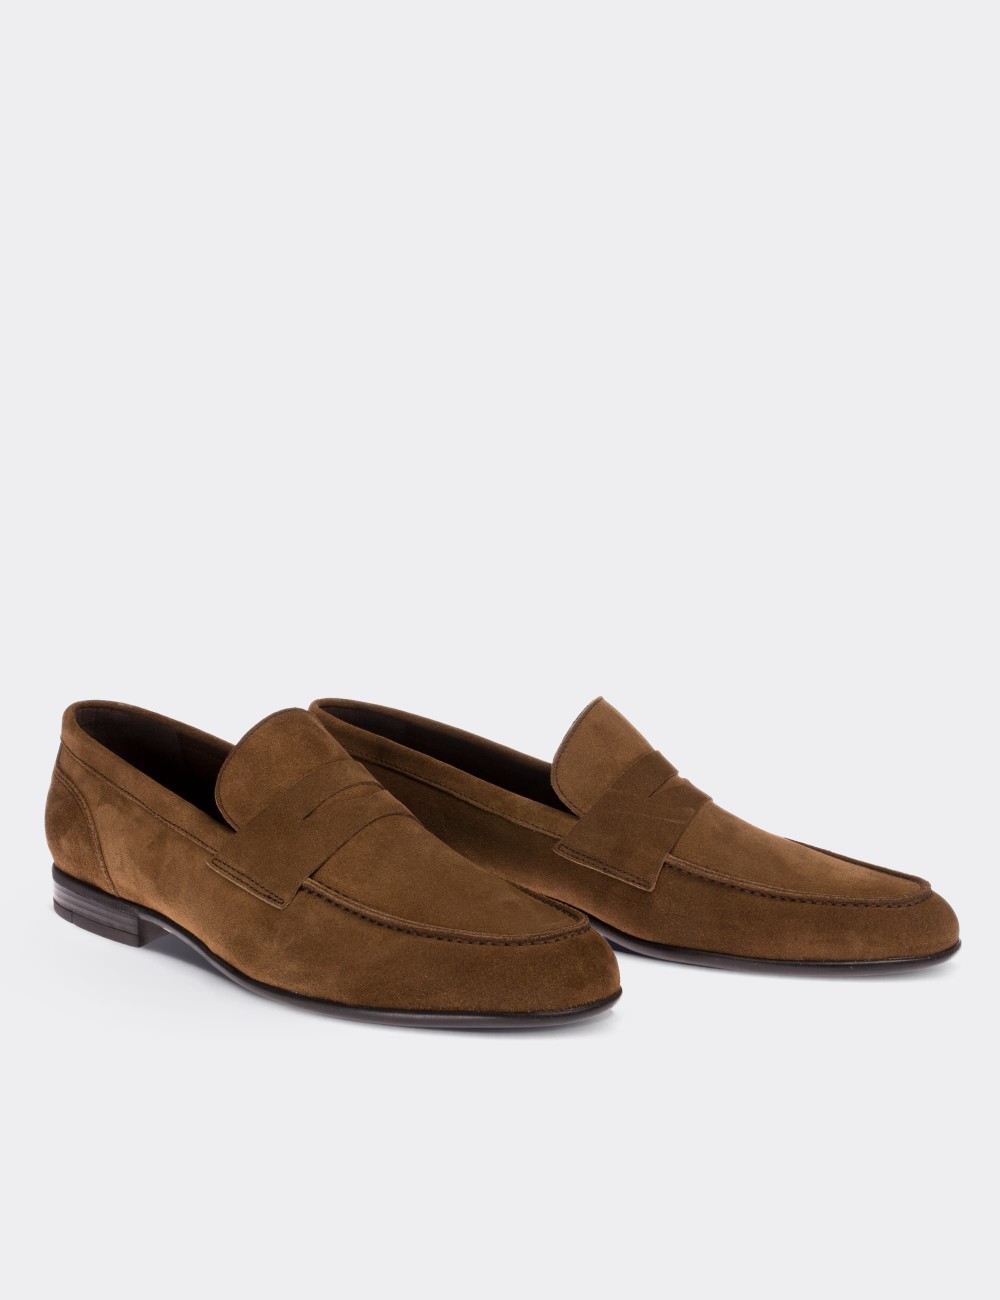 Tan Suede Leather Loafers - 01714MTBAC01